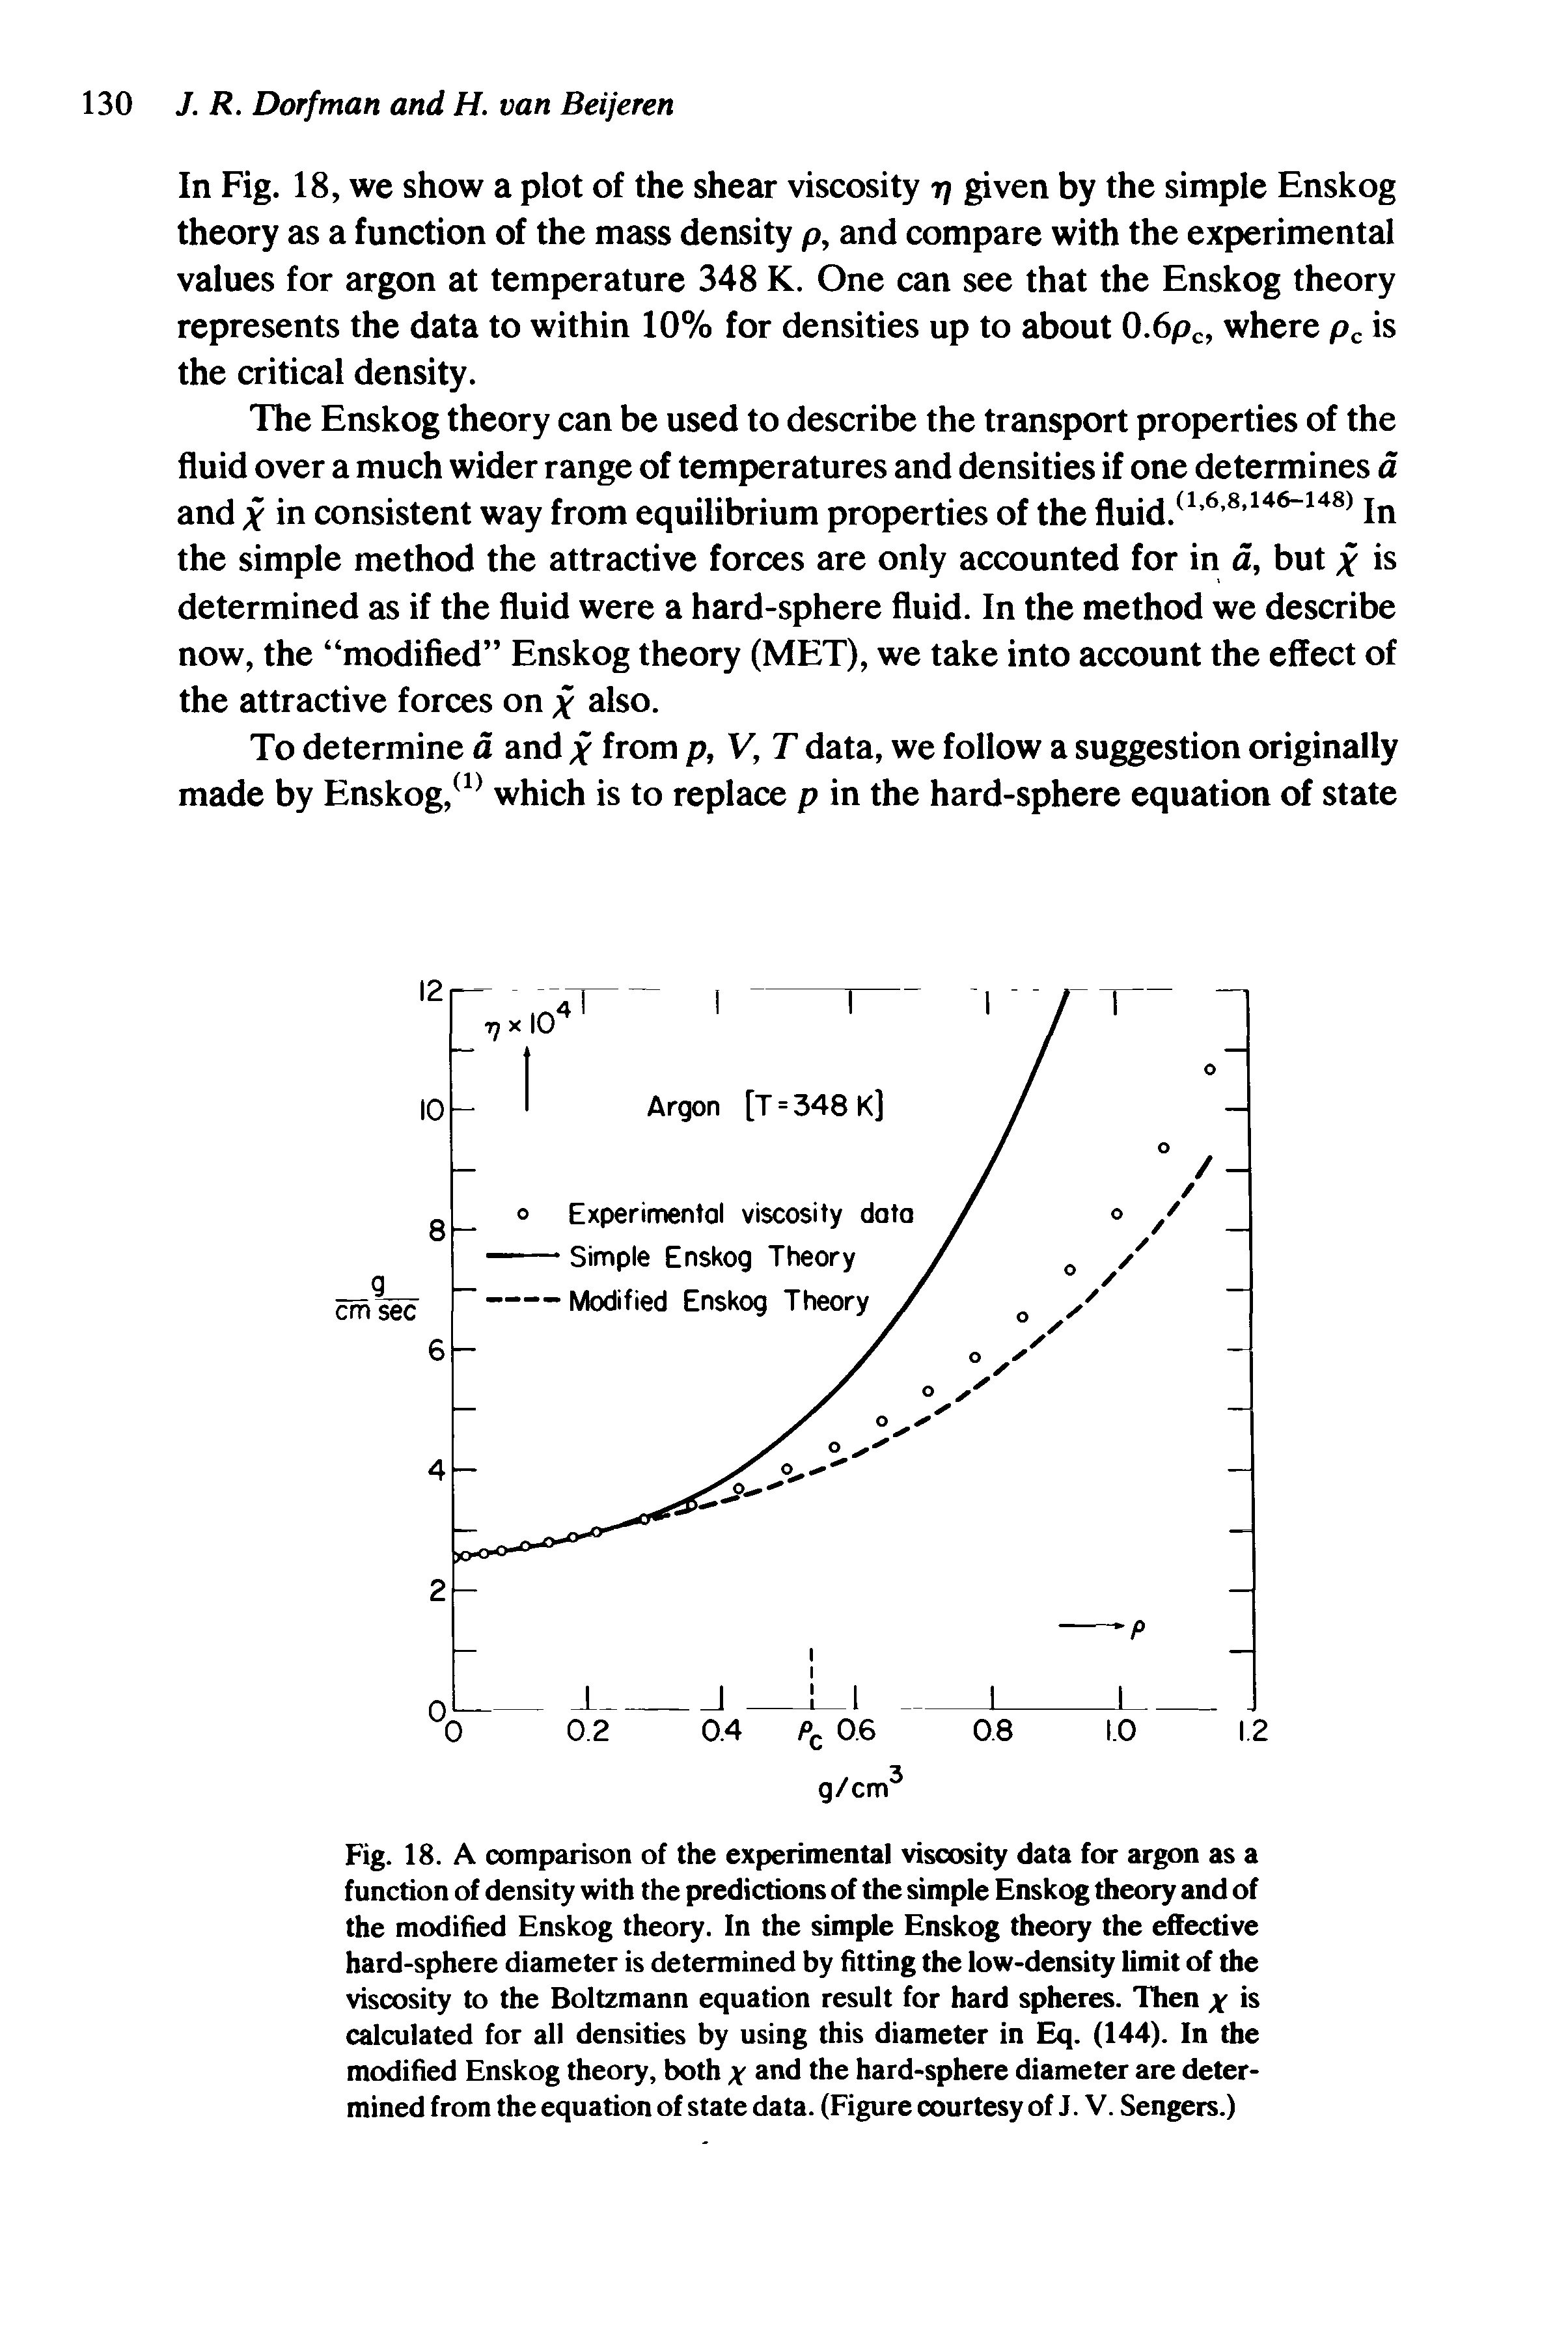 Fig. 18. A comparison of the experimental viscosity data for argon as a function of density with the predictions of the simple Enskog theory and of the modified Enskog theory. In the simple Enskog theory the effective hard-sphere diameter is determined by fitting the low-density limit of the viscosity to the Boltzmann equation result for hard spheres. Then x is calculated for all densities by using this diameter in Eq. (144). In the modified Enskog theory, both x nd the hard-sphere diameter are determined from the equation of state data. (Figure courtesy of J. V. Sengers.)...